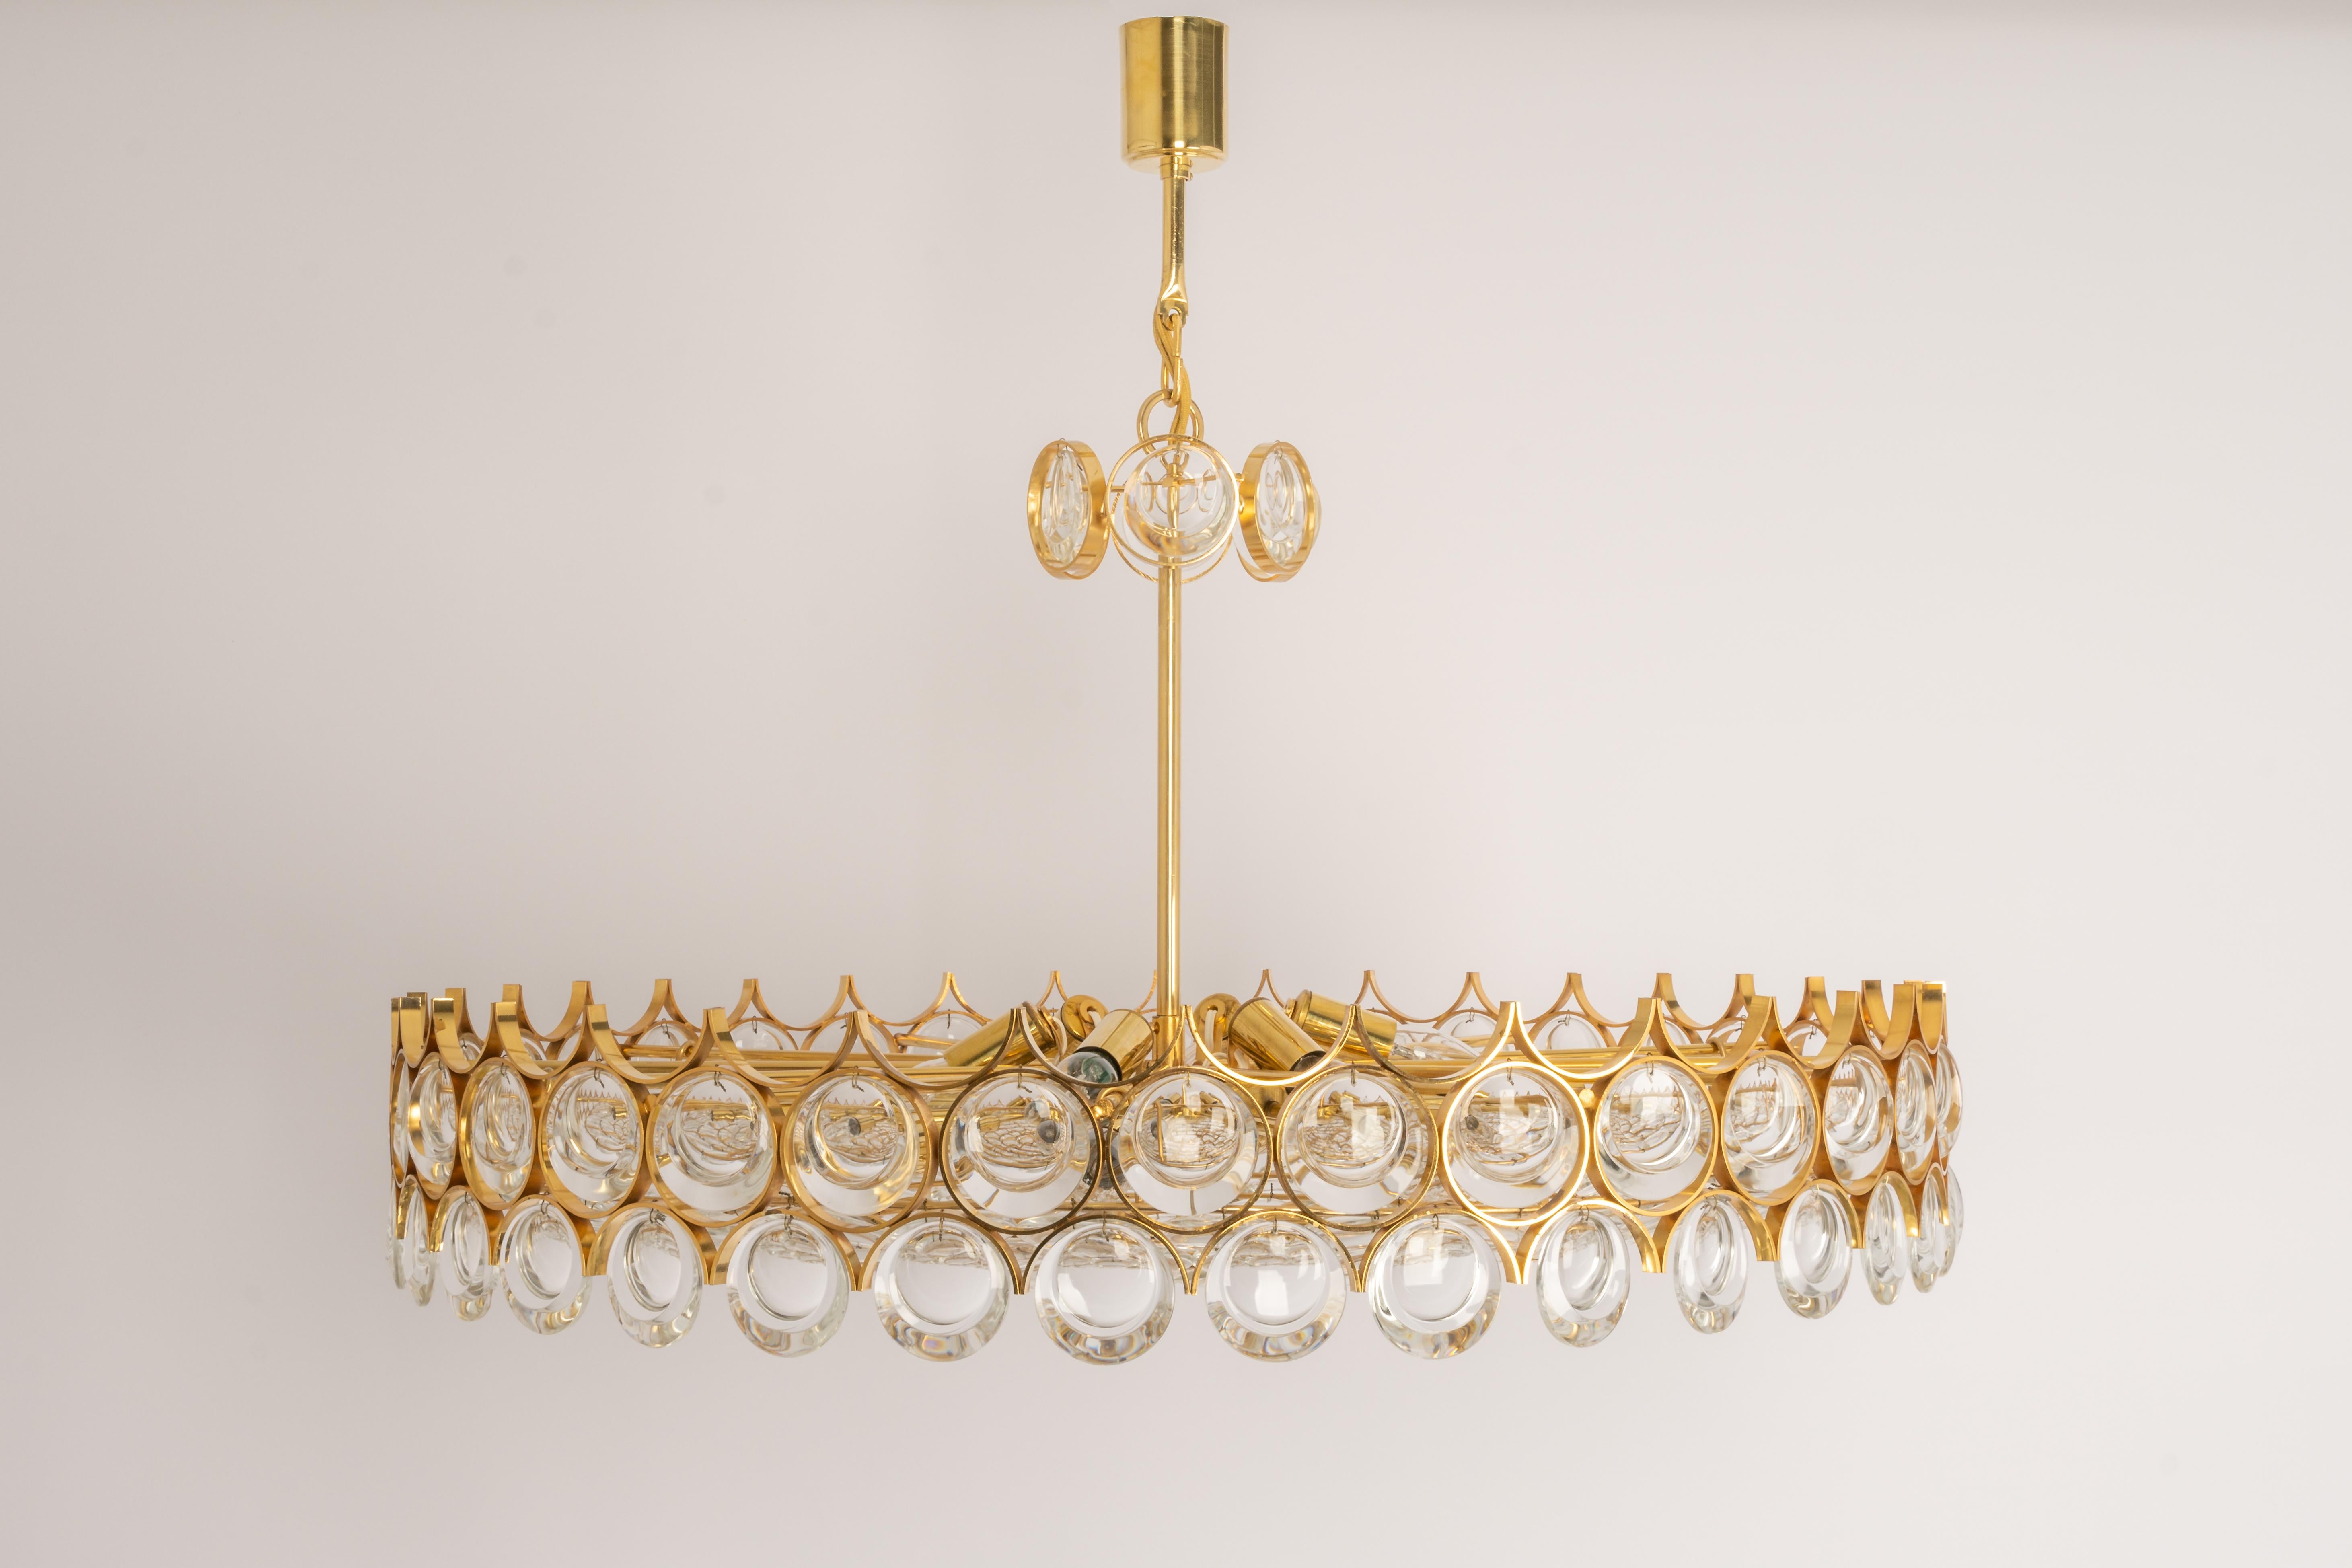 A wonderful and high-quality gilded chandelier or pendant light fixture by Palwa -Design Sciolari, Germany, 1970s.
It is made of a 24-carat gold-plated brass frame decorated with individual 